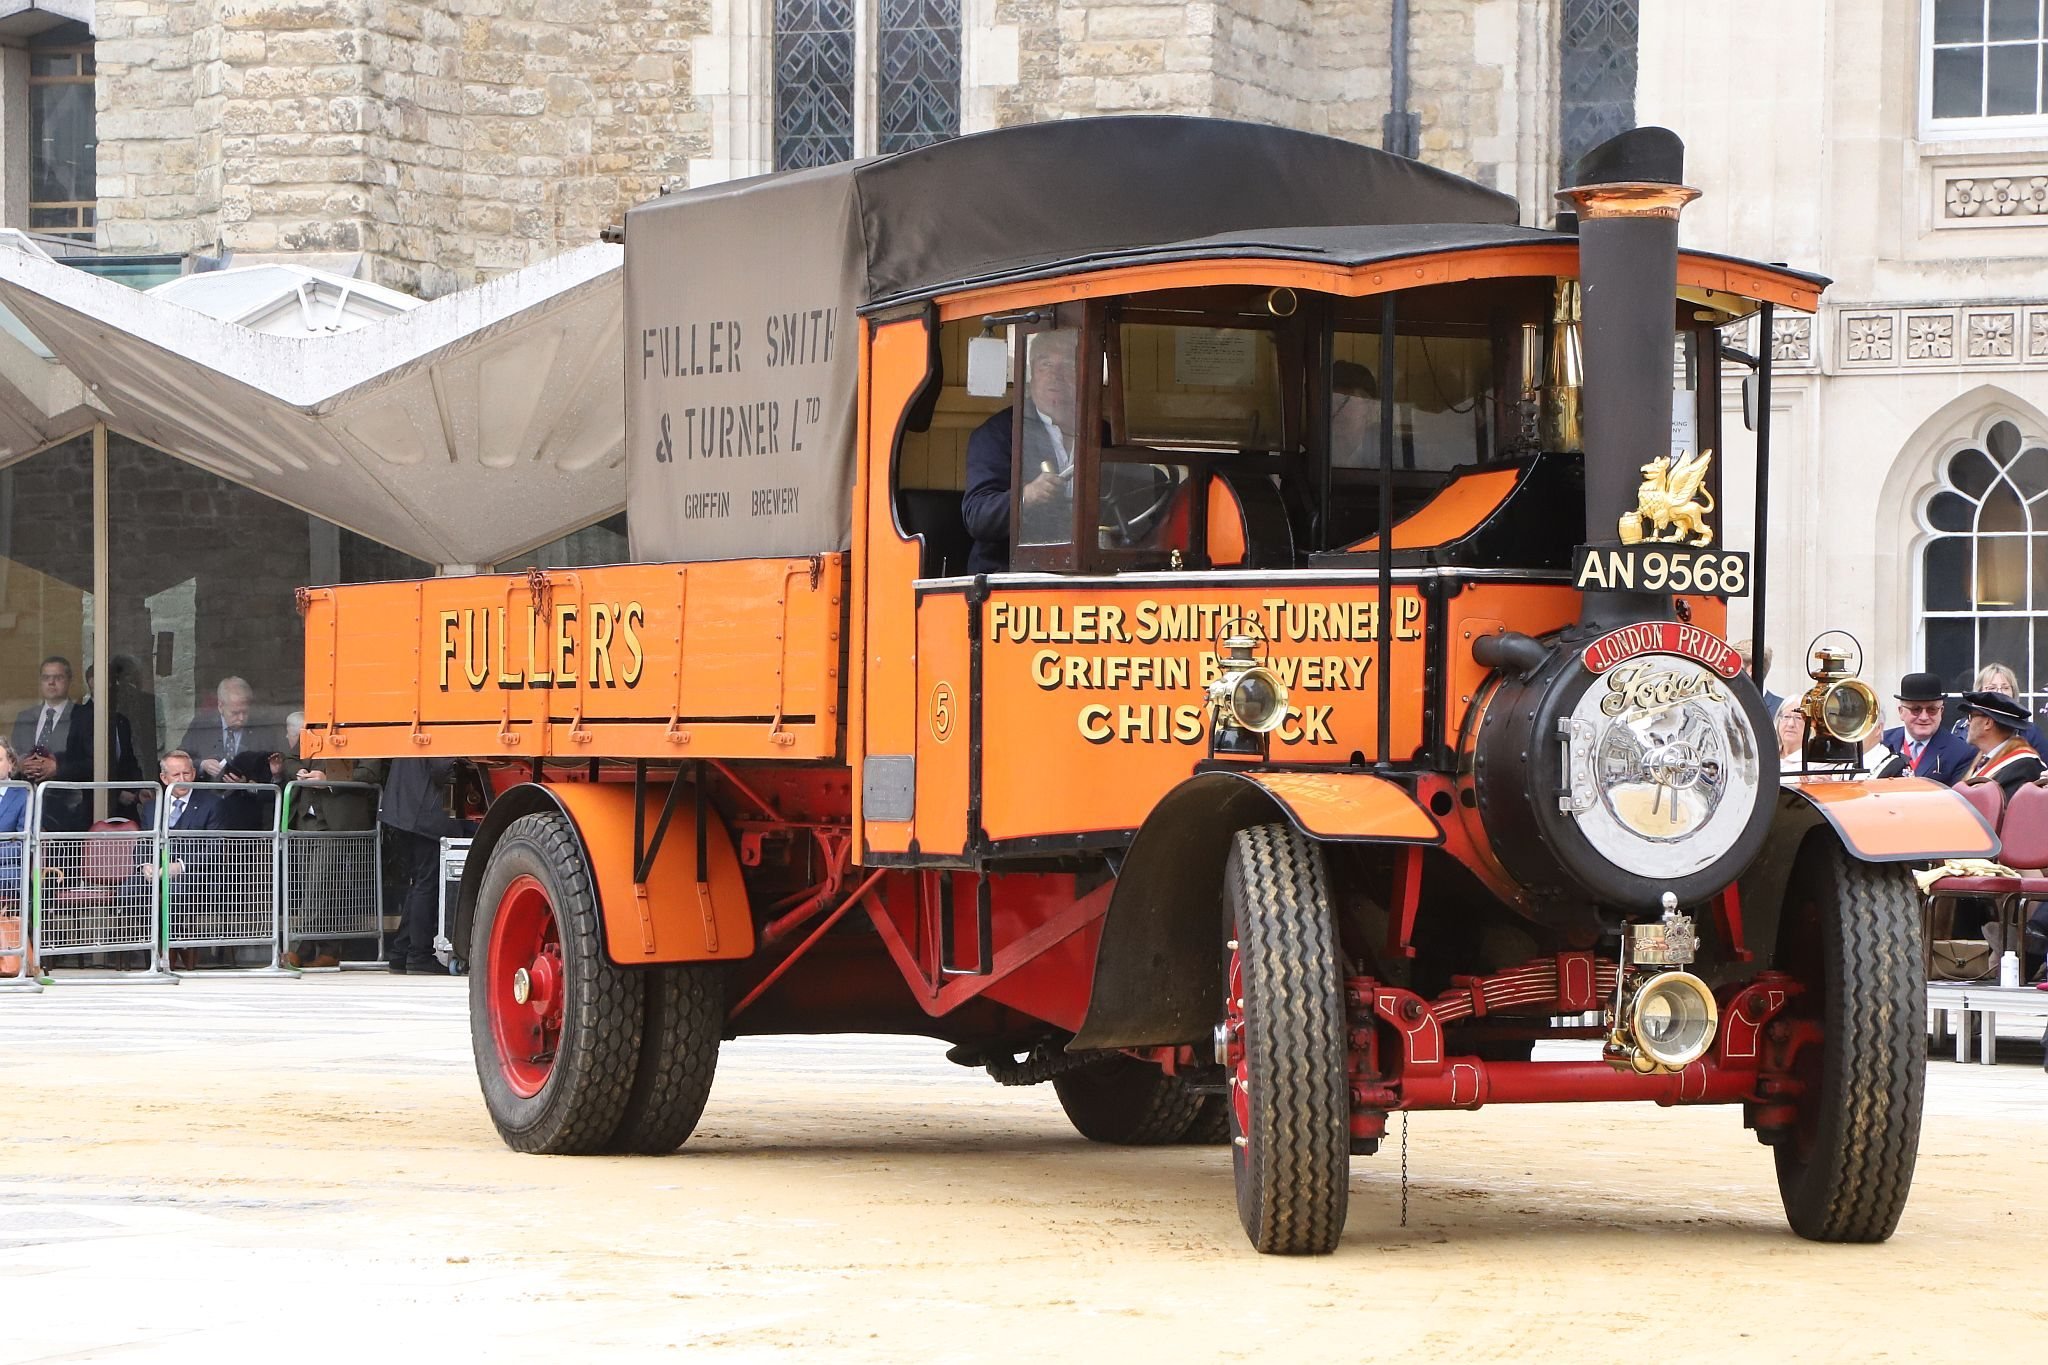 Foden Steam Lorry 1928, AN9568. City of London 2023 Cart Marking in Guildhall Yard on 22-Jul-2023. Hosted by the Worshipful Company of Carmen with the Lord Mayor of the City of London in attendance. Wooden plates on the vehicles are branded with hot irons to allow them to ply for trade in the Square Mile. Another of the City Livery Company's annual ceremonies.